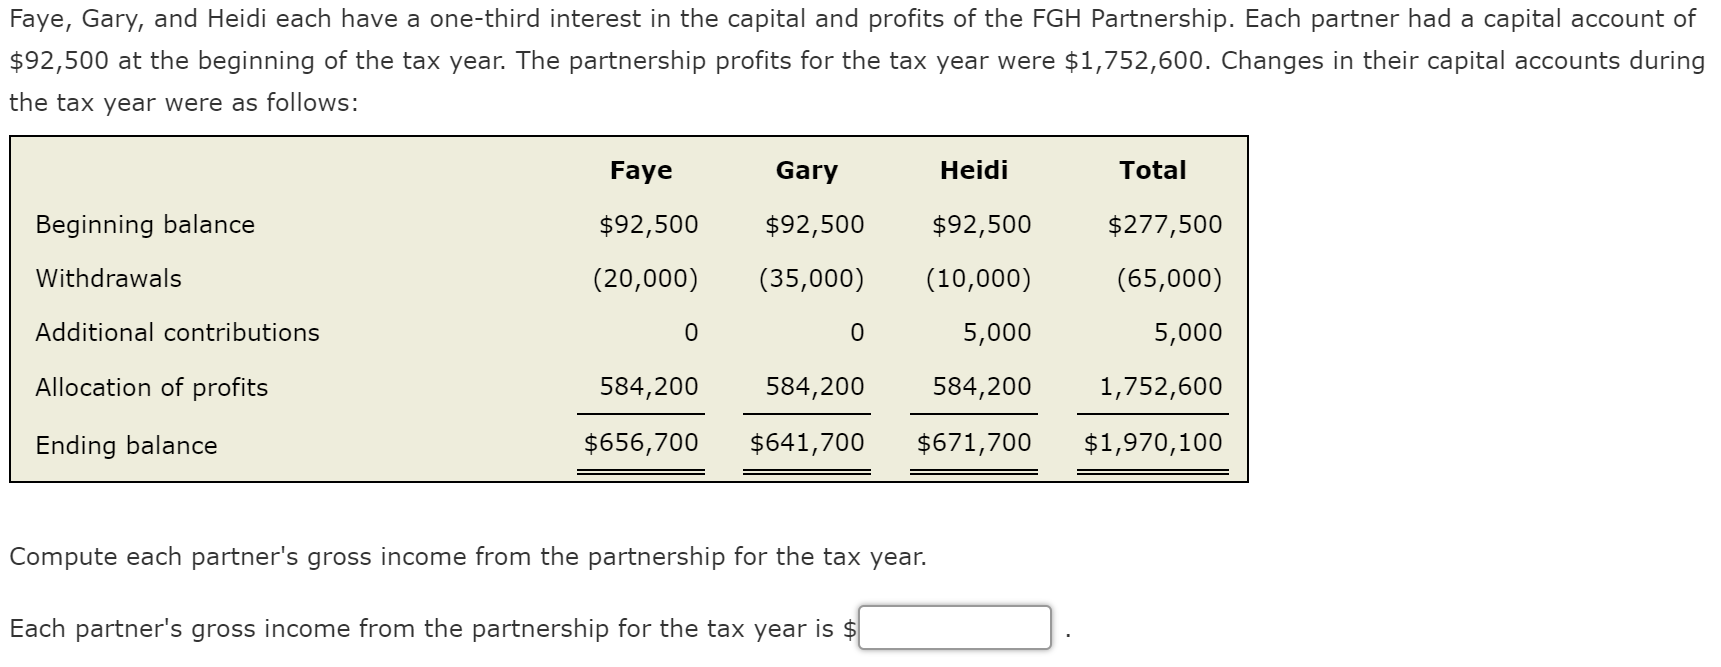 Faye, Gary, and Heidi each have a one-third interest in the capital and profits of the FGH Partnership. Each partner had a capital account of
$92,500 at the beginning of the tax year. The partnership profits for the tax year were $1,752,600. Changes in their capital accounts during
the tax year were as follows:
Faye
Gary
Heidi
Total
Beginning balance
$92,500
$92,500
$92,500
$277,500
Withdrawals
(20,000)
(35,000)
(10,000)
(65,000)
Additional contributions
5,000
5,000
Allocation of profits
584,200
584,200
584,200
1,752,600
Ending balance
$656,700
$641,700
$671,700
$1,970,100
Compute each partner's gross income from the partnership for the tax year.
Each partner's gross income from the partnership for the tax year is $
